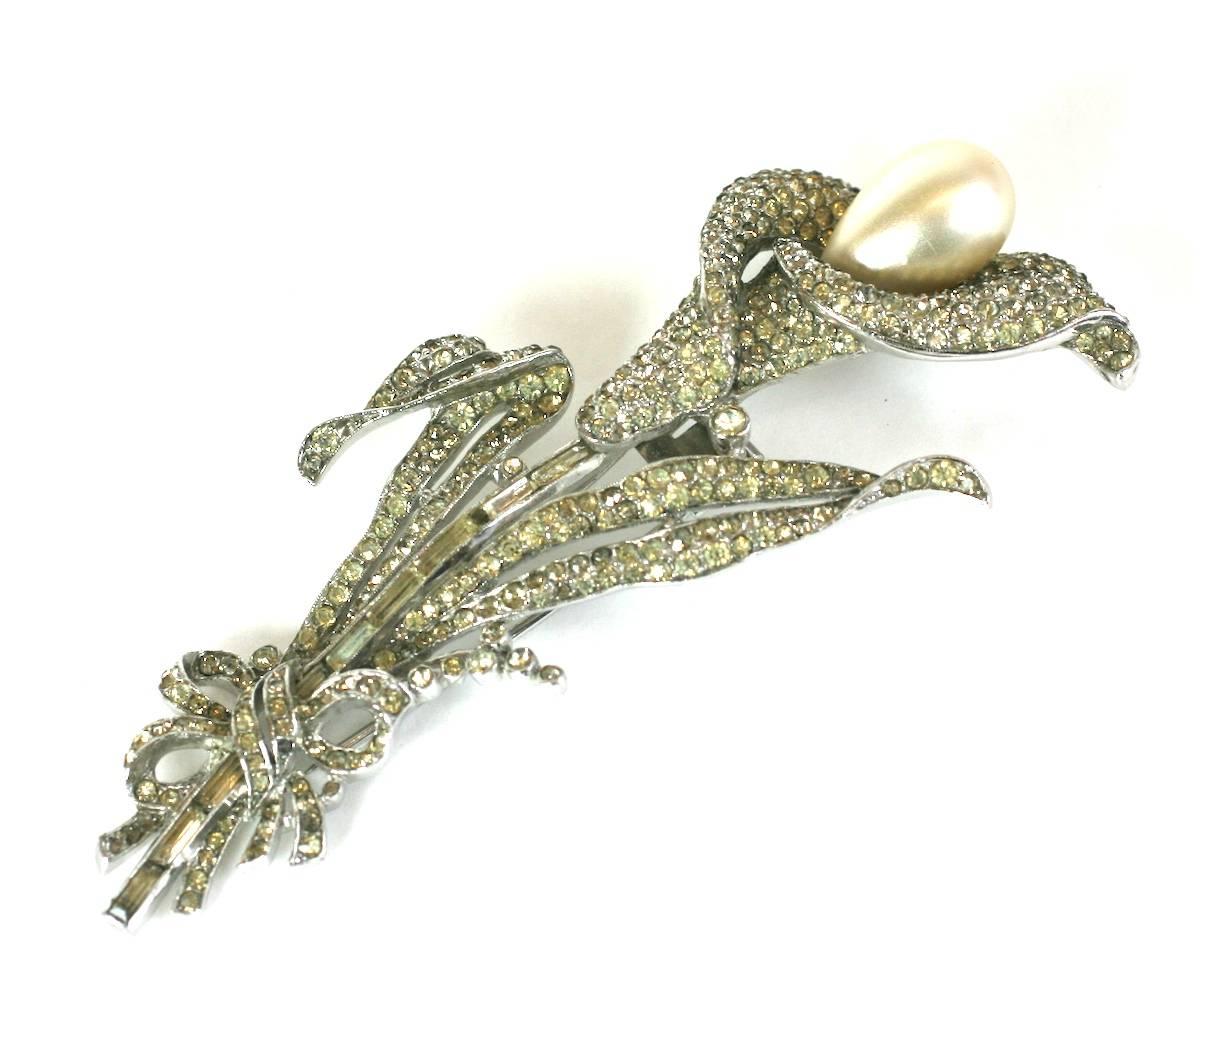 Trifari Calla Lily Brooch of fine crystal pave, large faux pear shaped pearl and vari size rectangular baguettes with intricate pave work. Designed by Alfred Philippe for Trifari. Double clip back fitting. 1930's USA. Excellent condition. Length 4